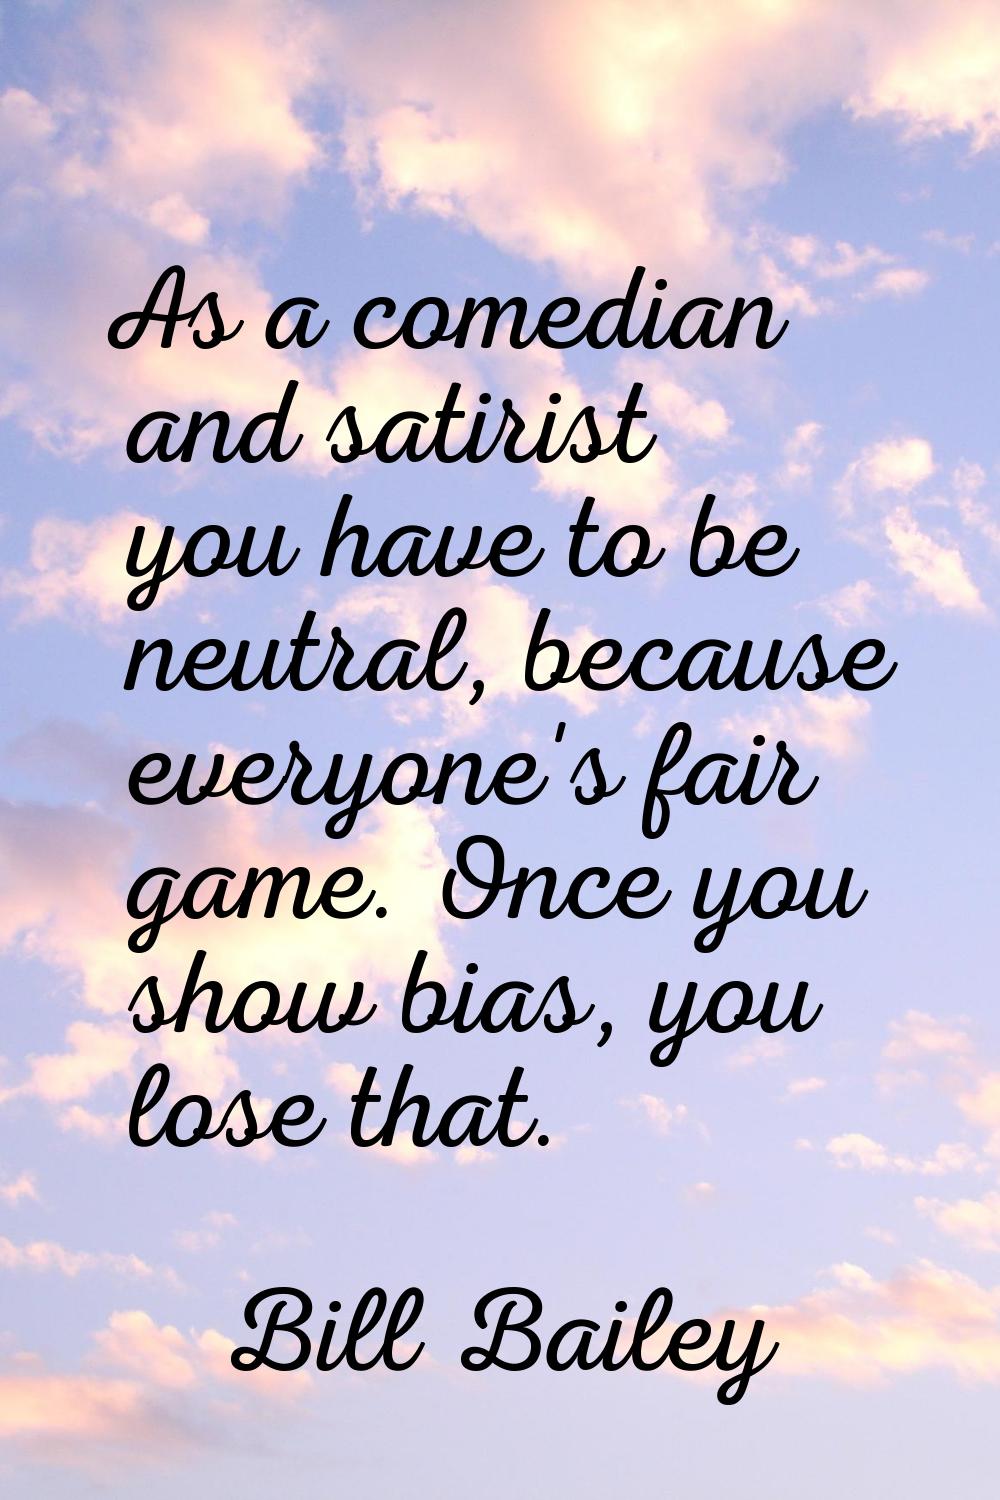 As a comedian and satirist you have to be neutral, because everyone's fair game. Once you show bias